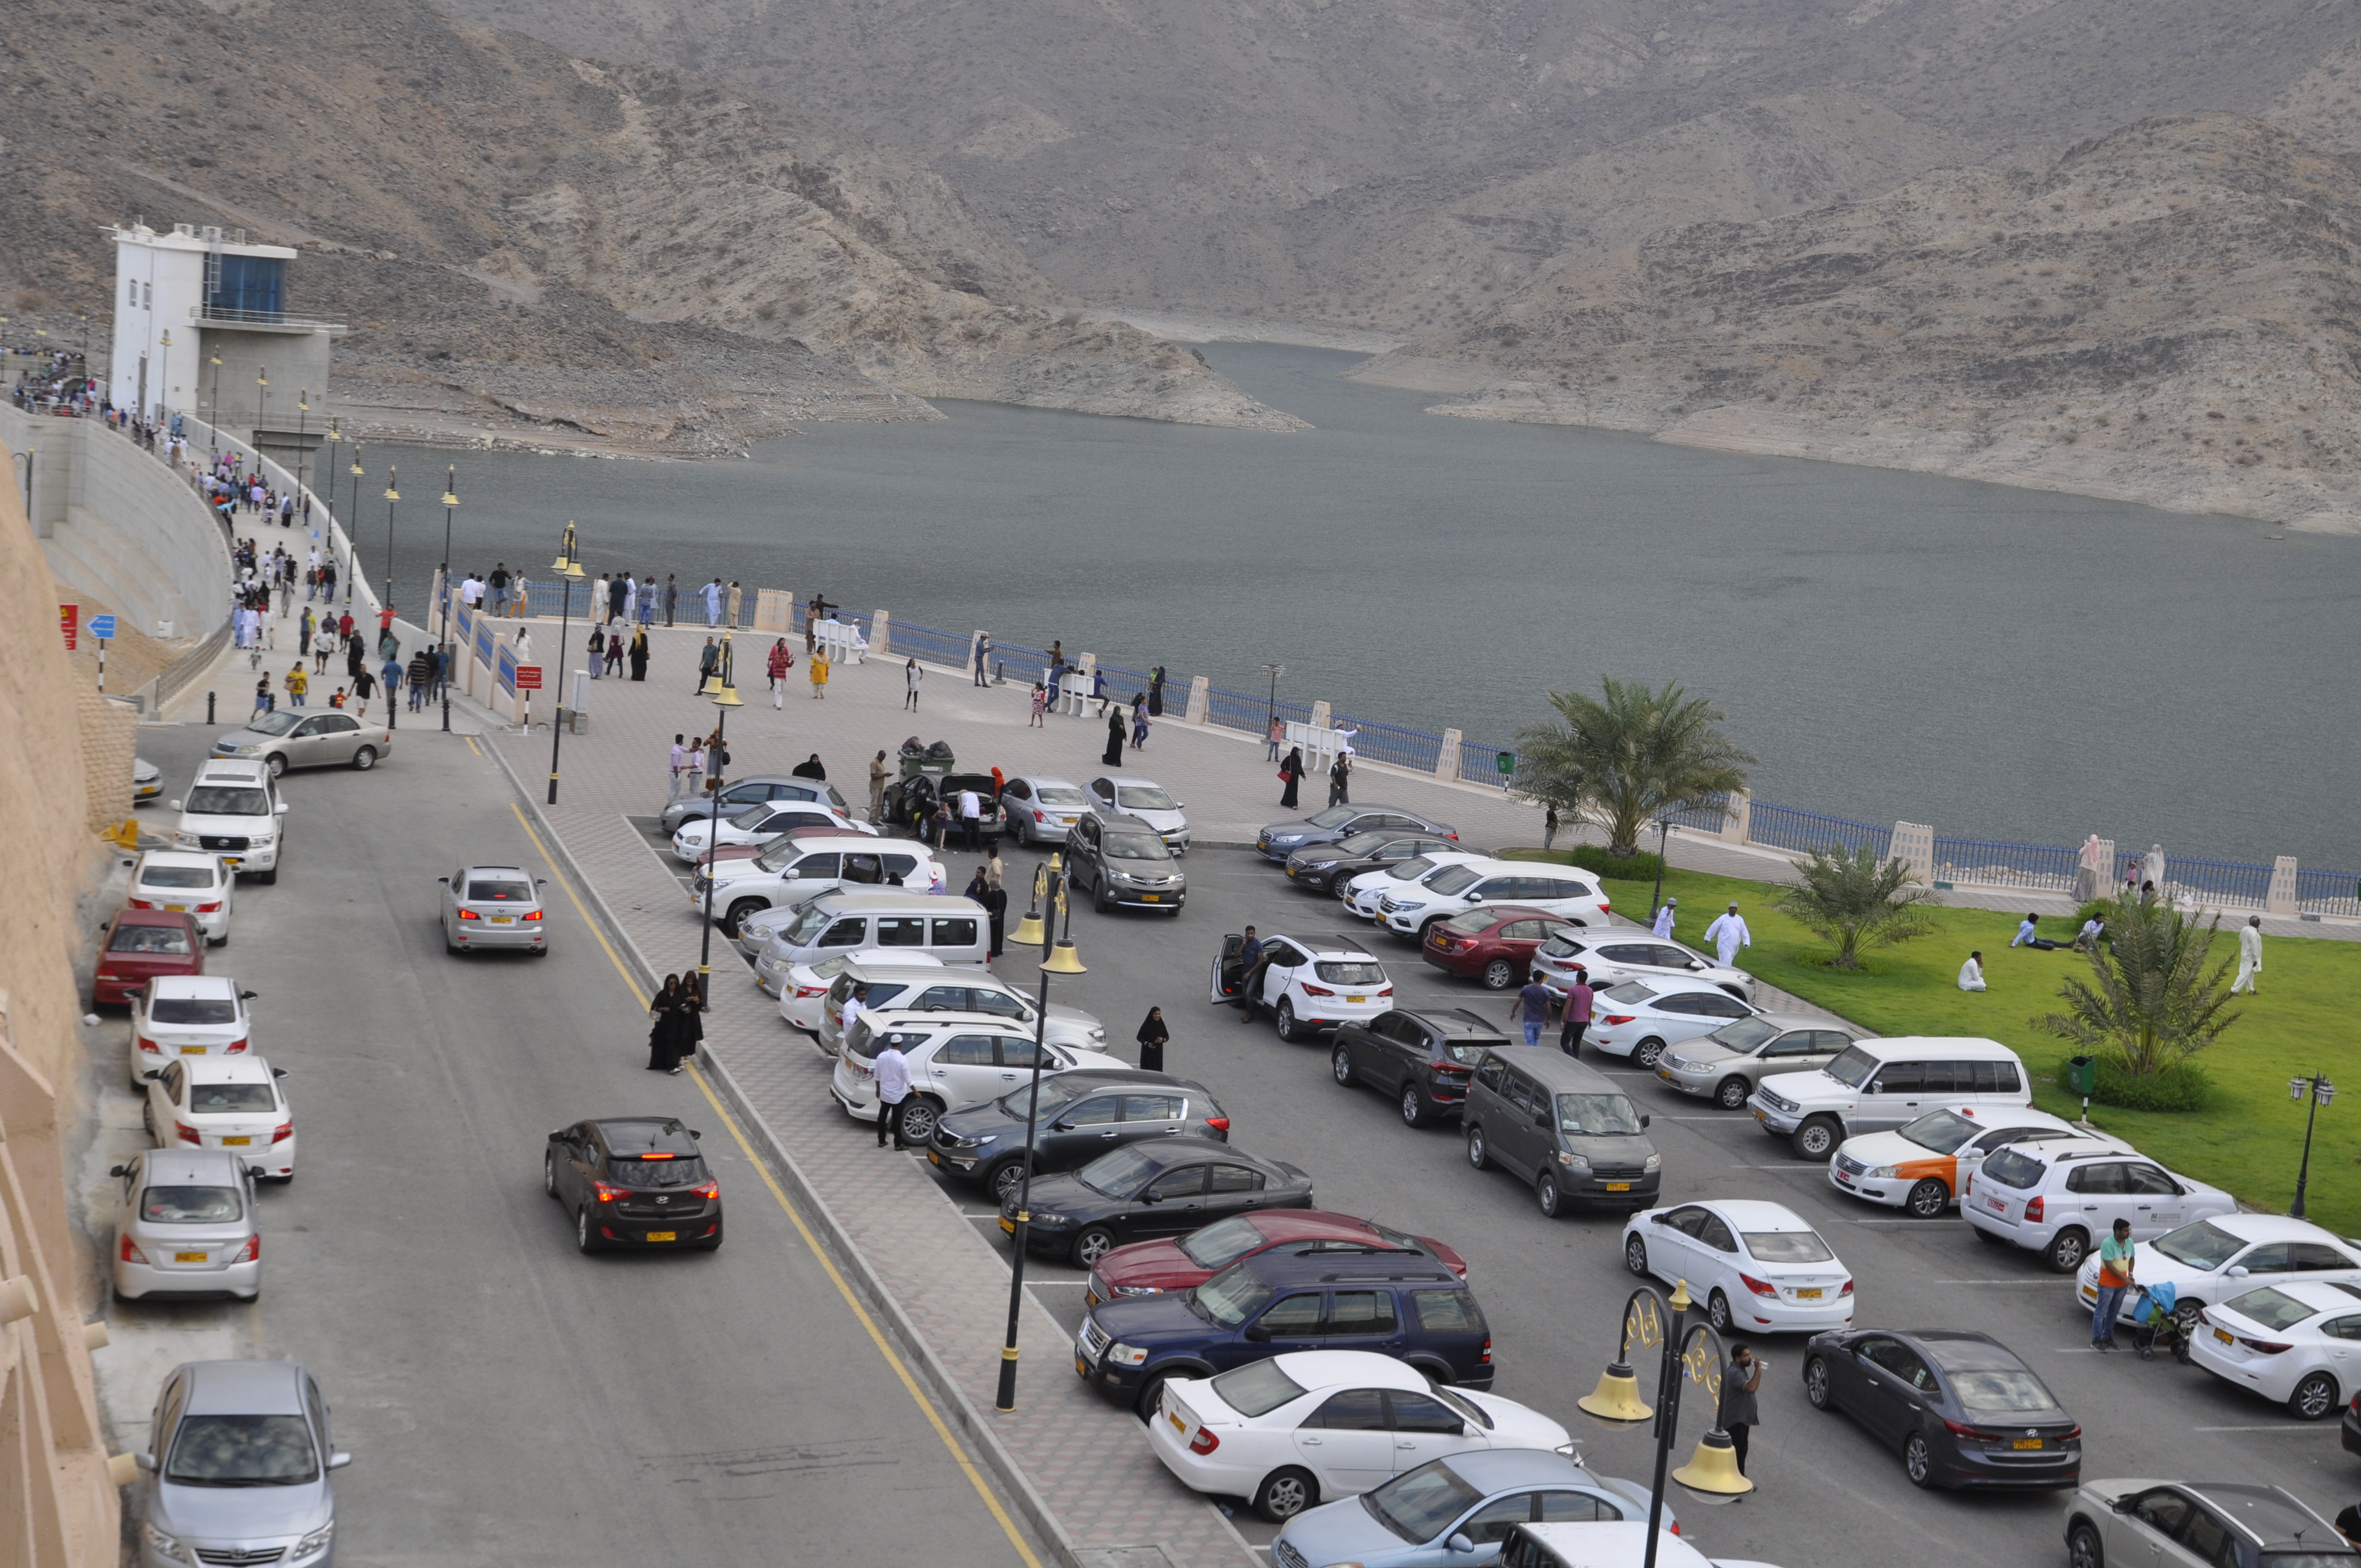 In Pictures: Huge footfall at Omani tourist sites during Eid holidays